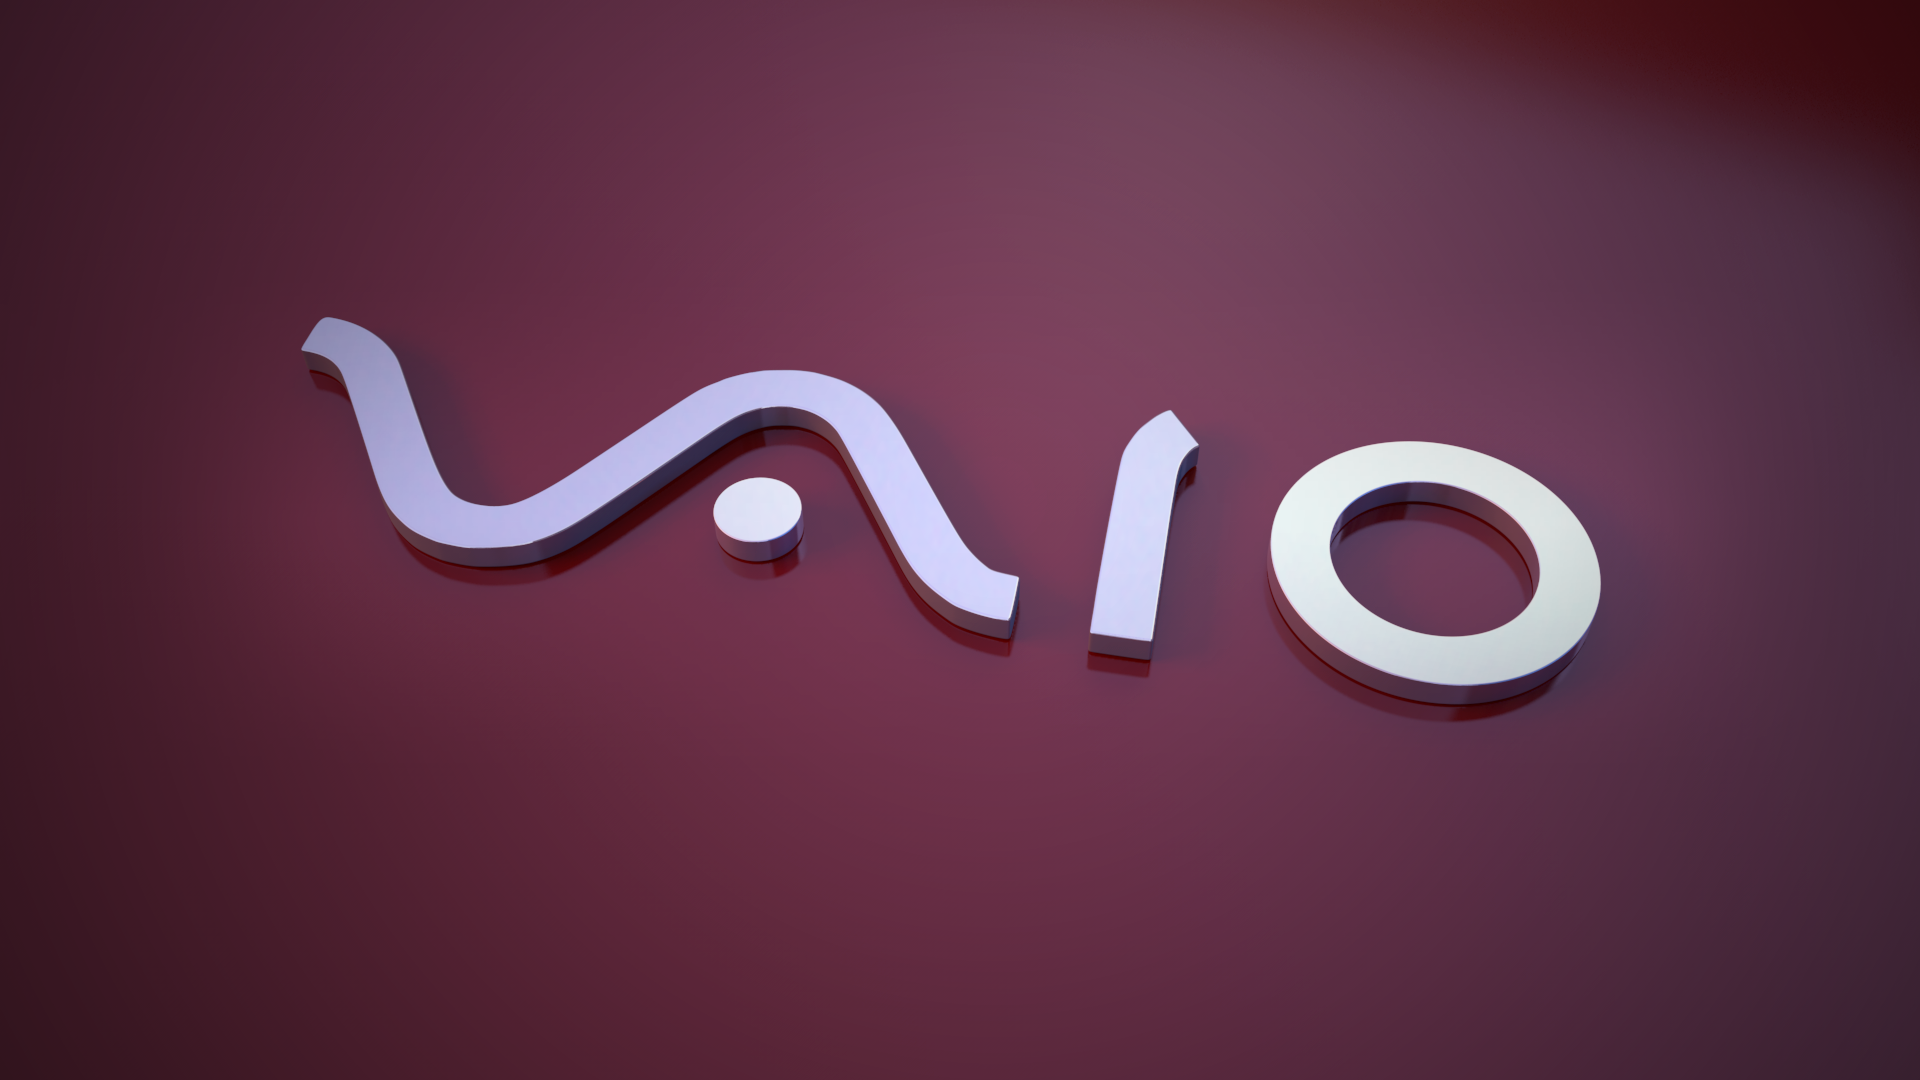 HD Sony Vaio Wallpaper Amp Background For